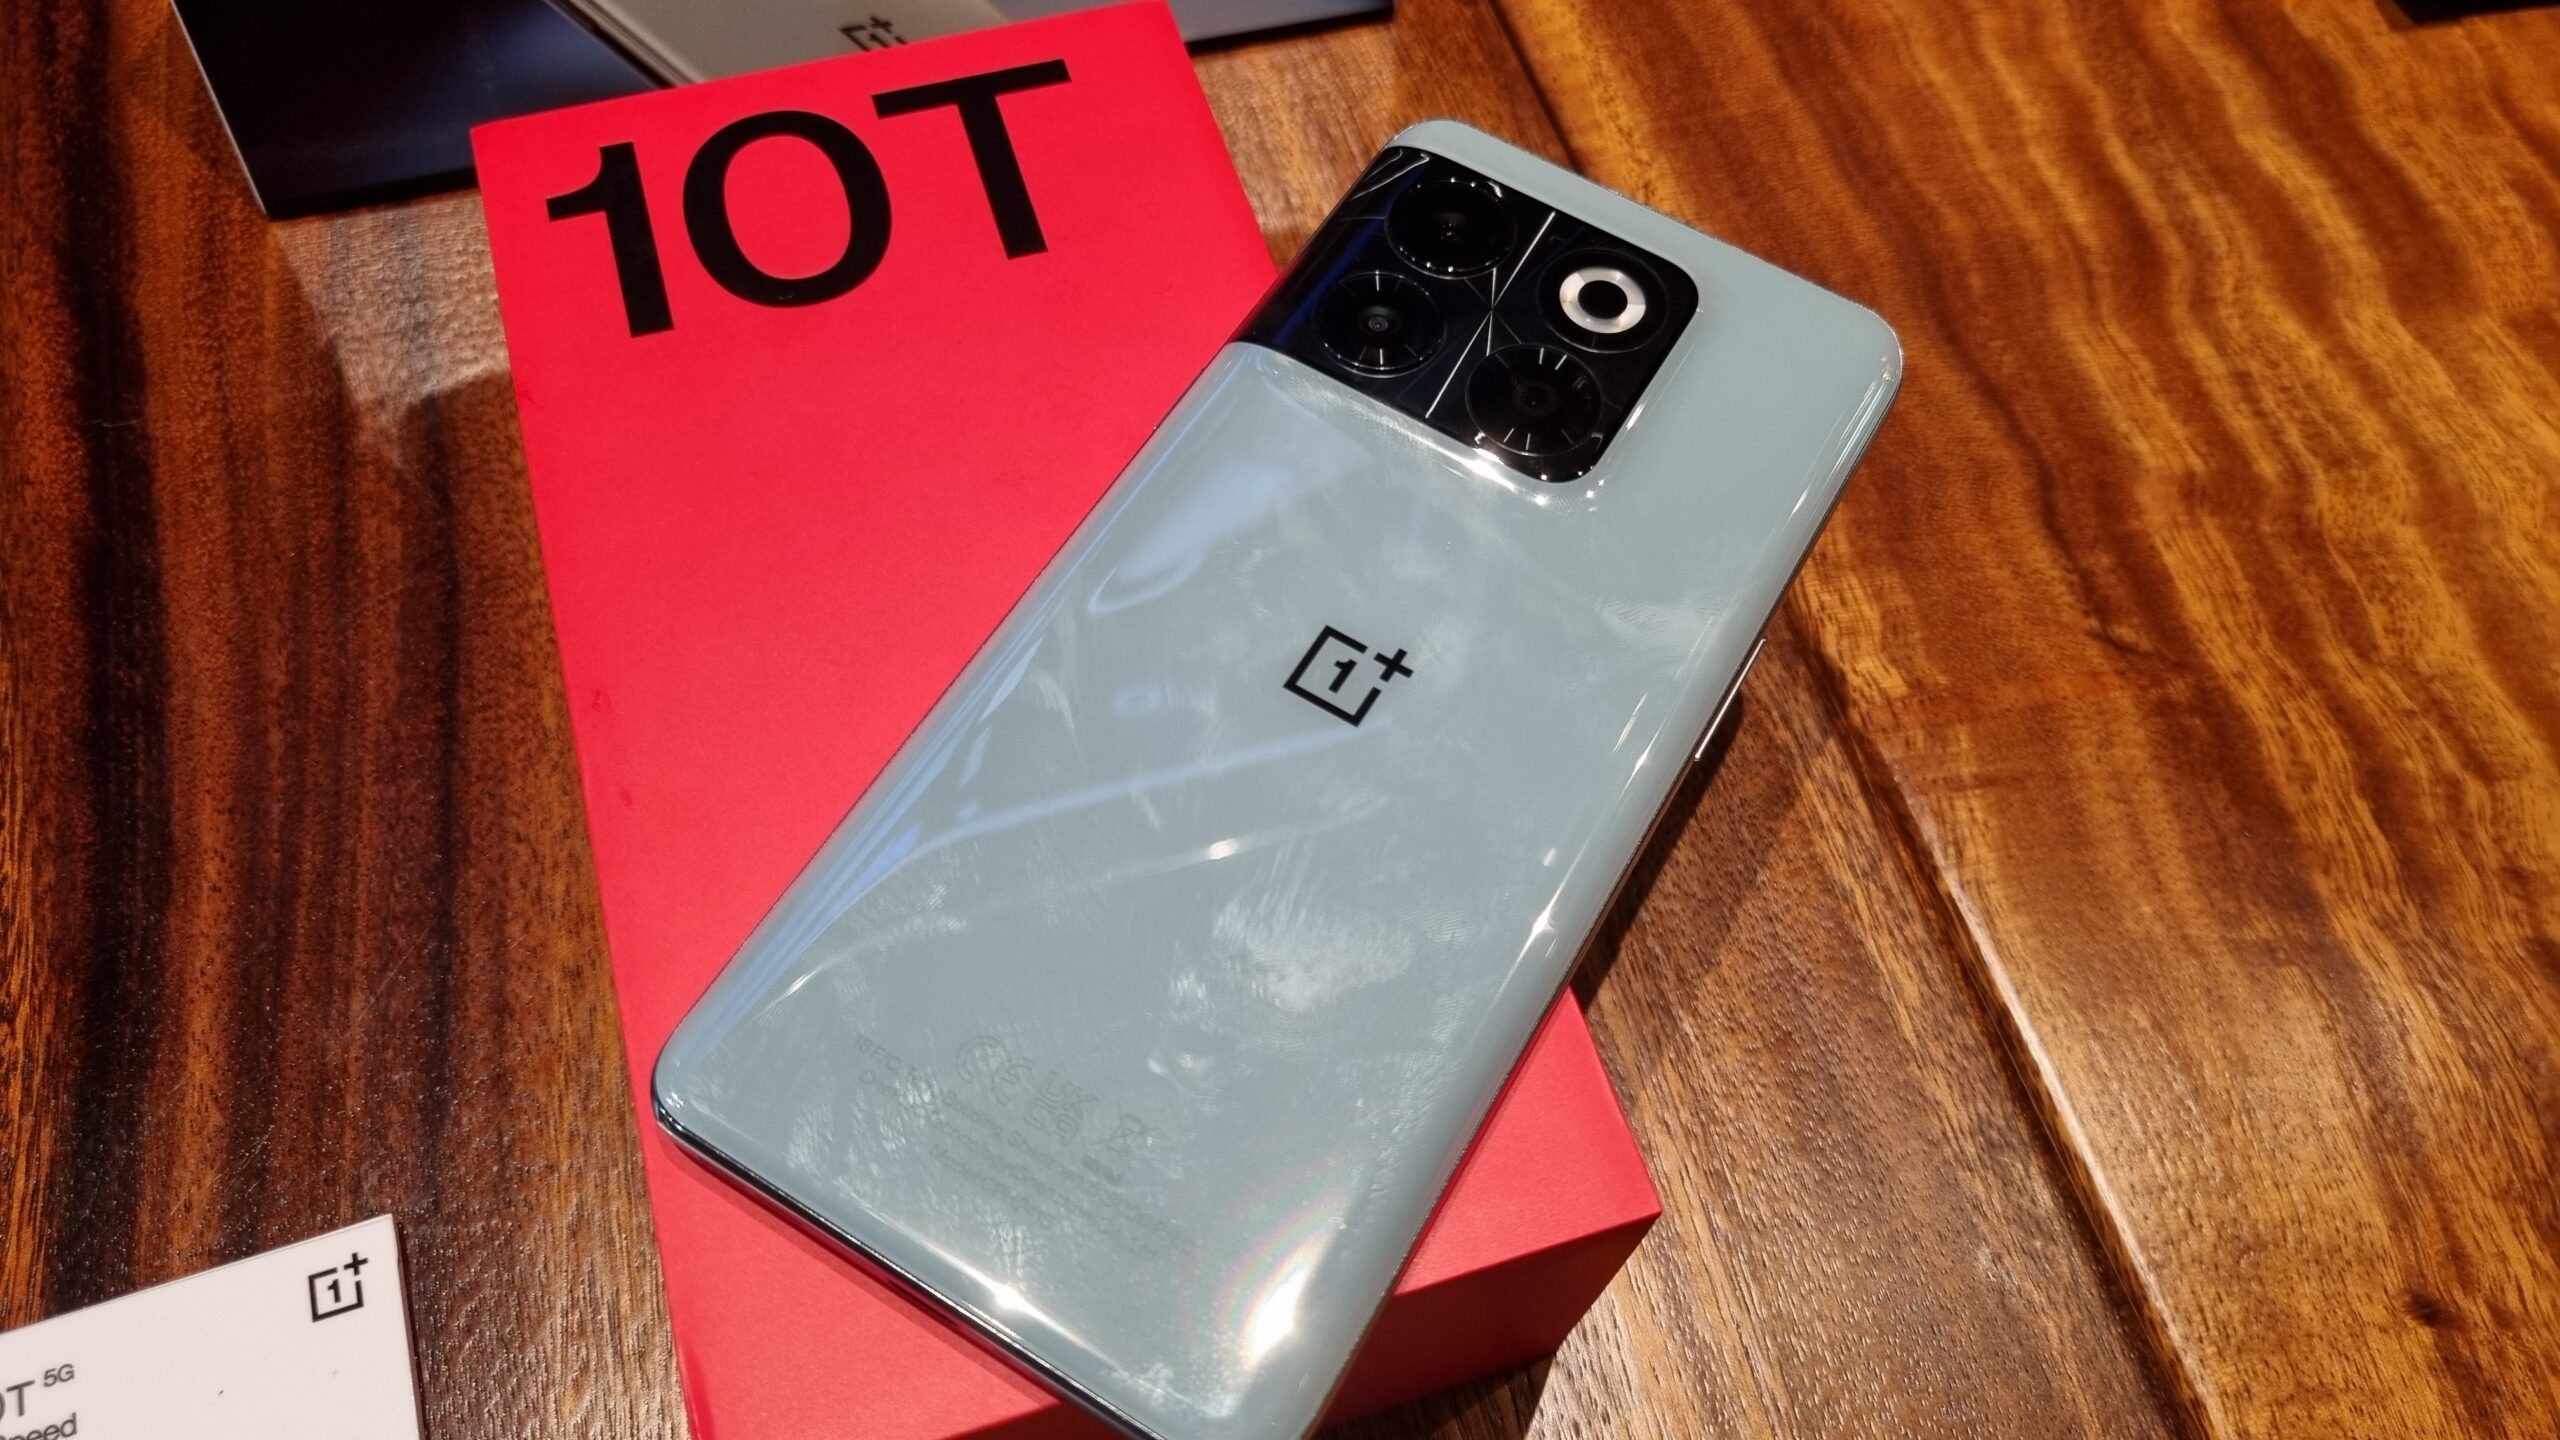 OnePlus launches in PH with the 10T 5G, priced at P35,990